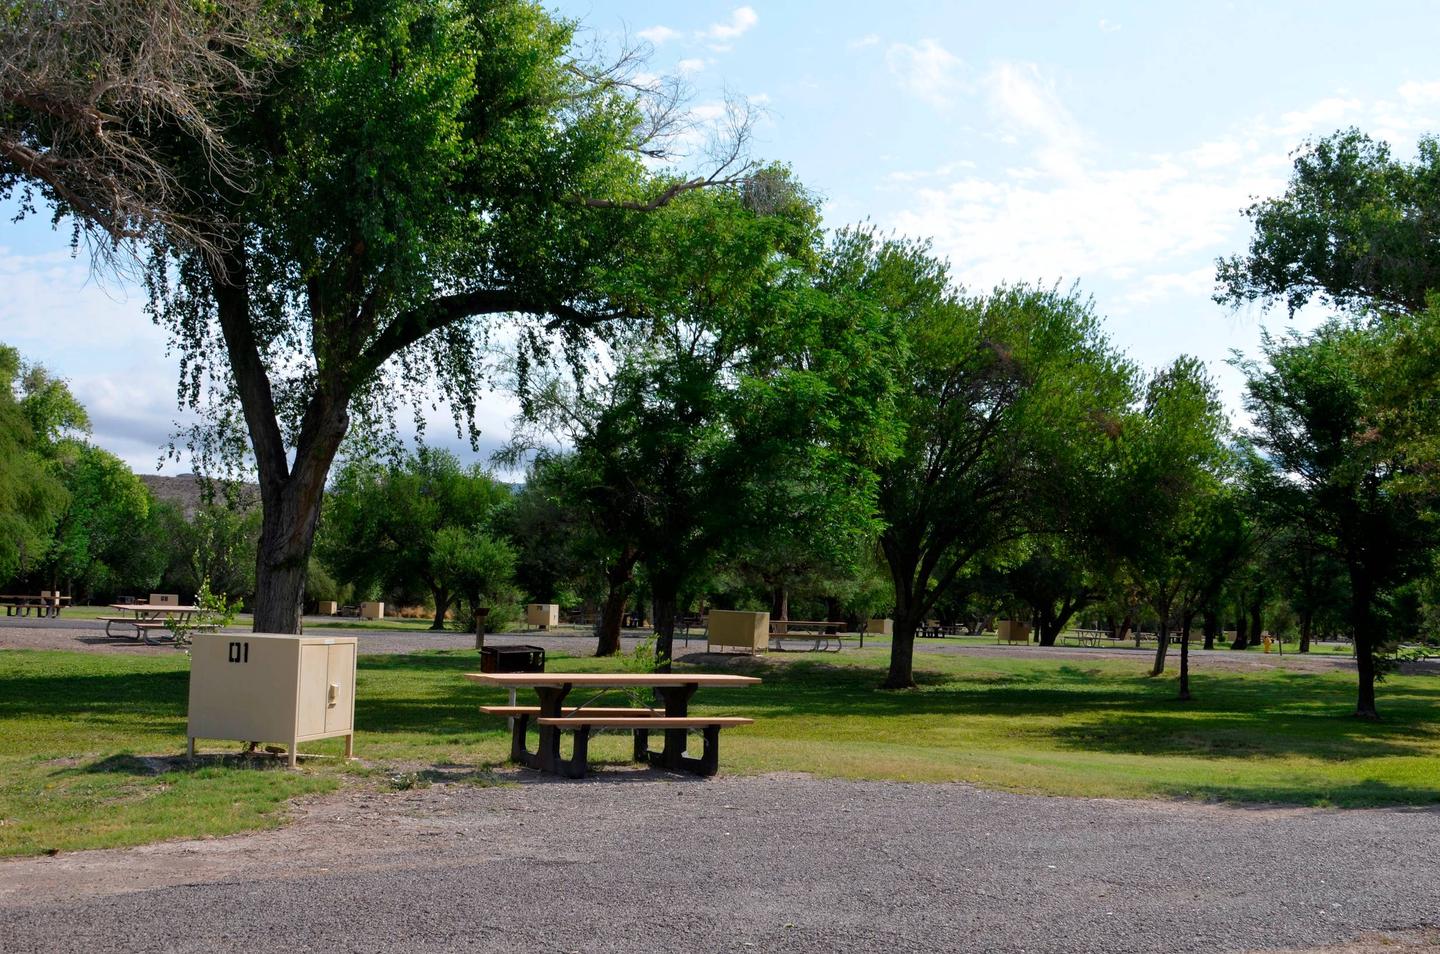 A bear box, picnic table, and metal grill sit underneath a lush, green tree at the end of a gravel driveway. Under the Cottonwoods